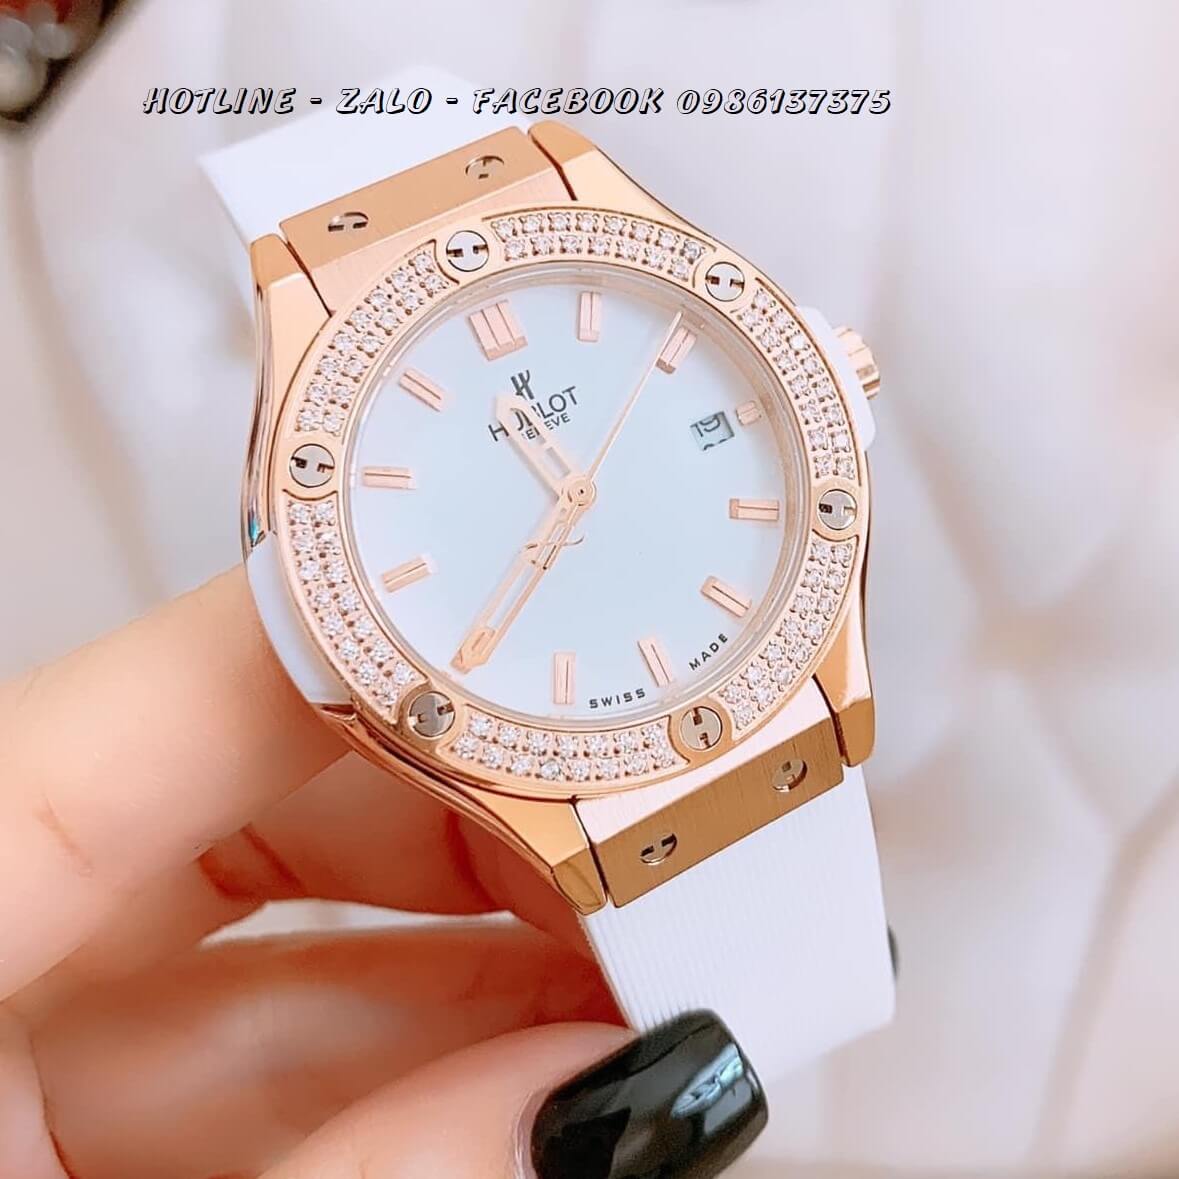 Đồng Hồ Hublot Nữ Dây Silicon Trắng 34mm Rose Gold